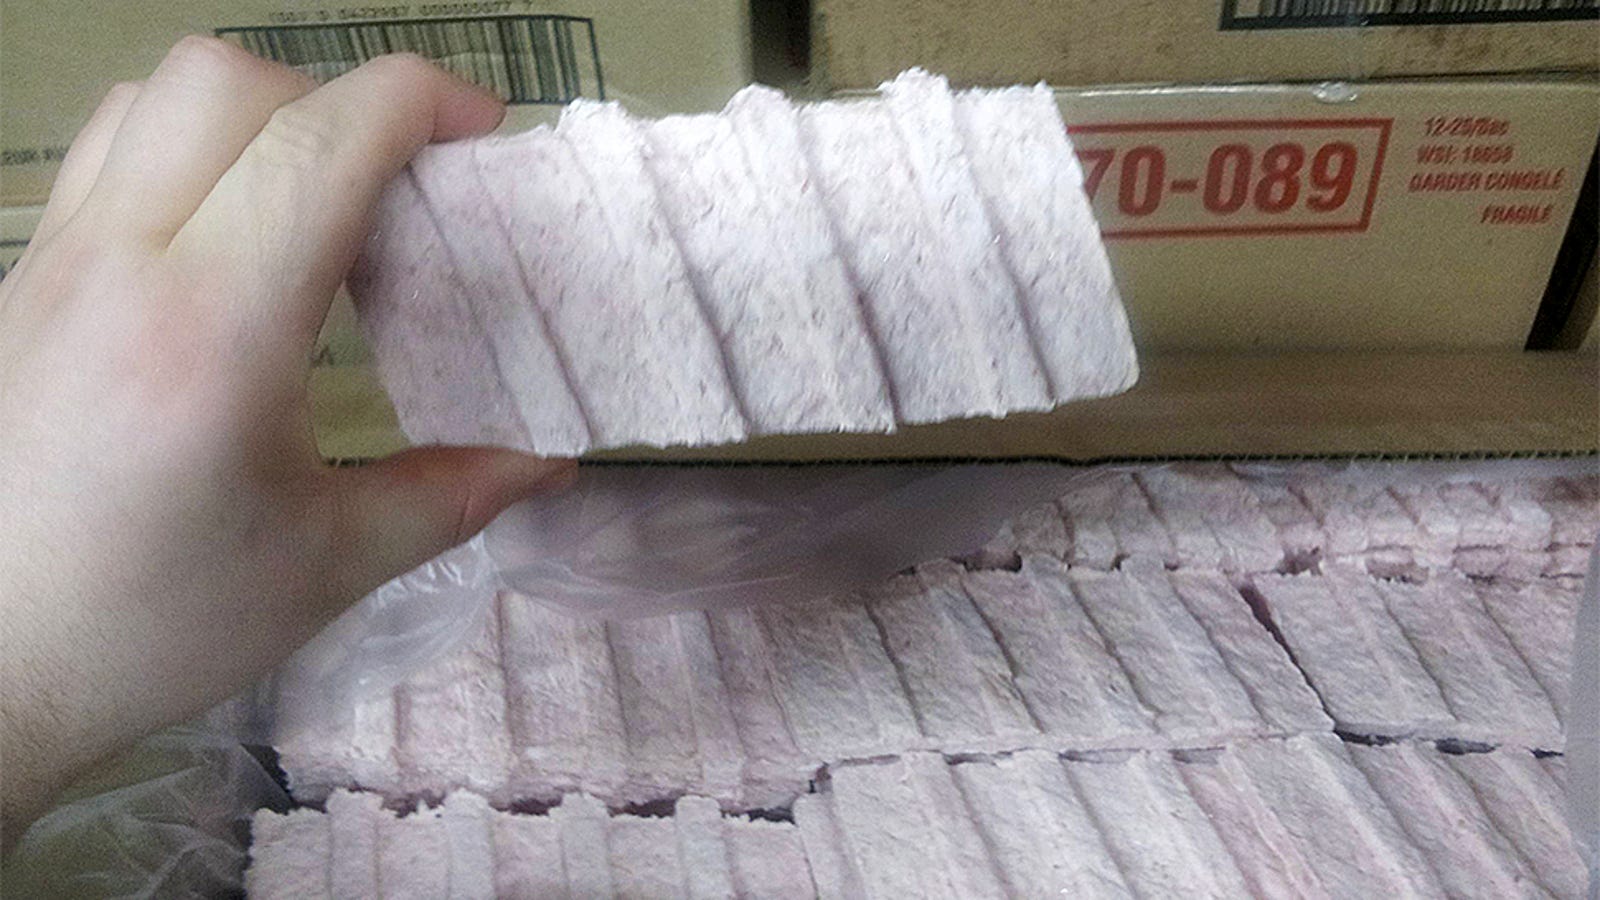 This is what a McRib really looks like before cooking it